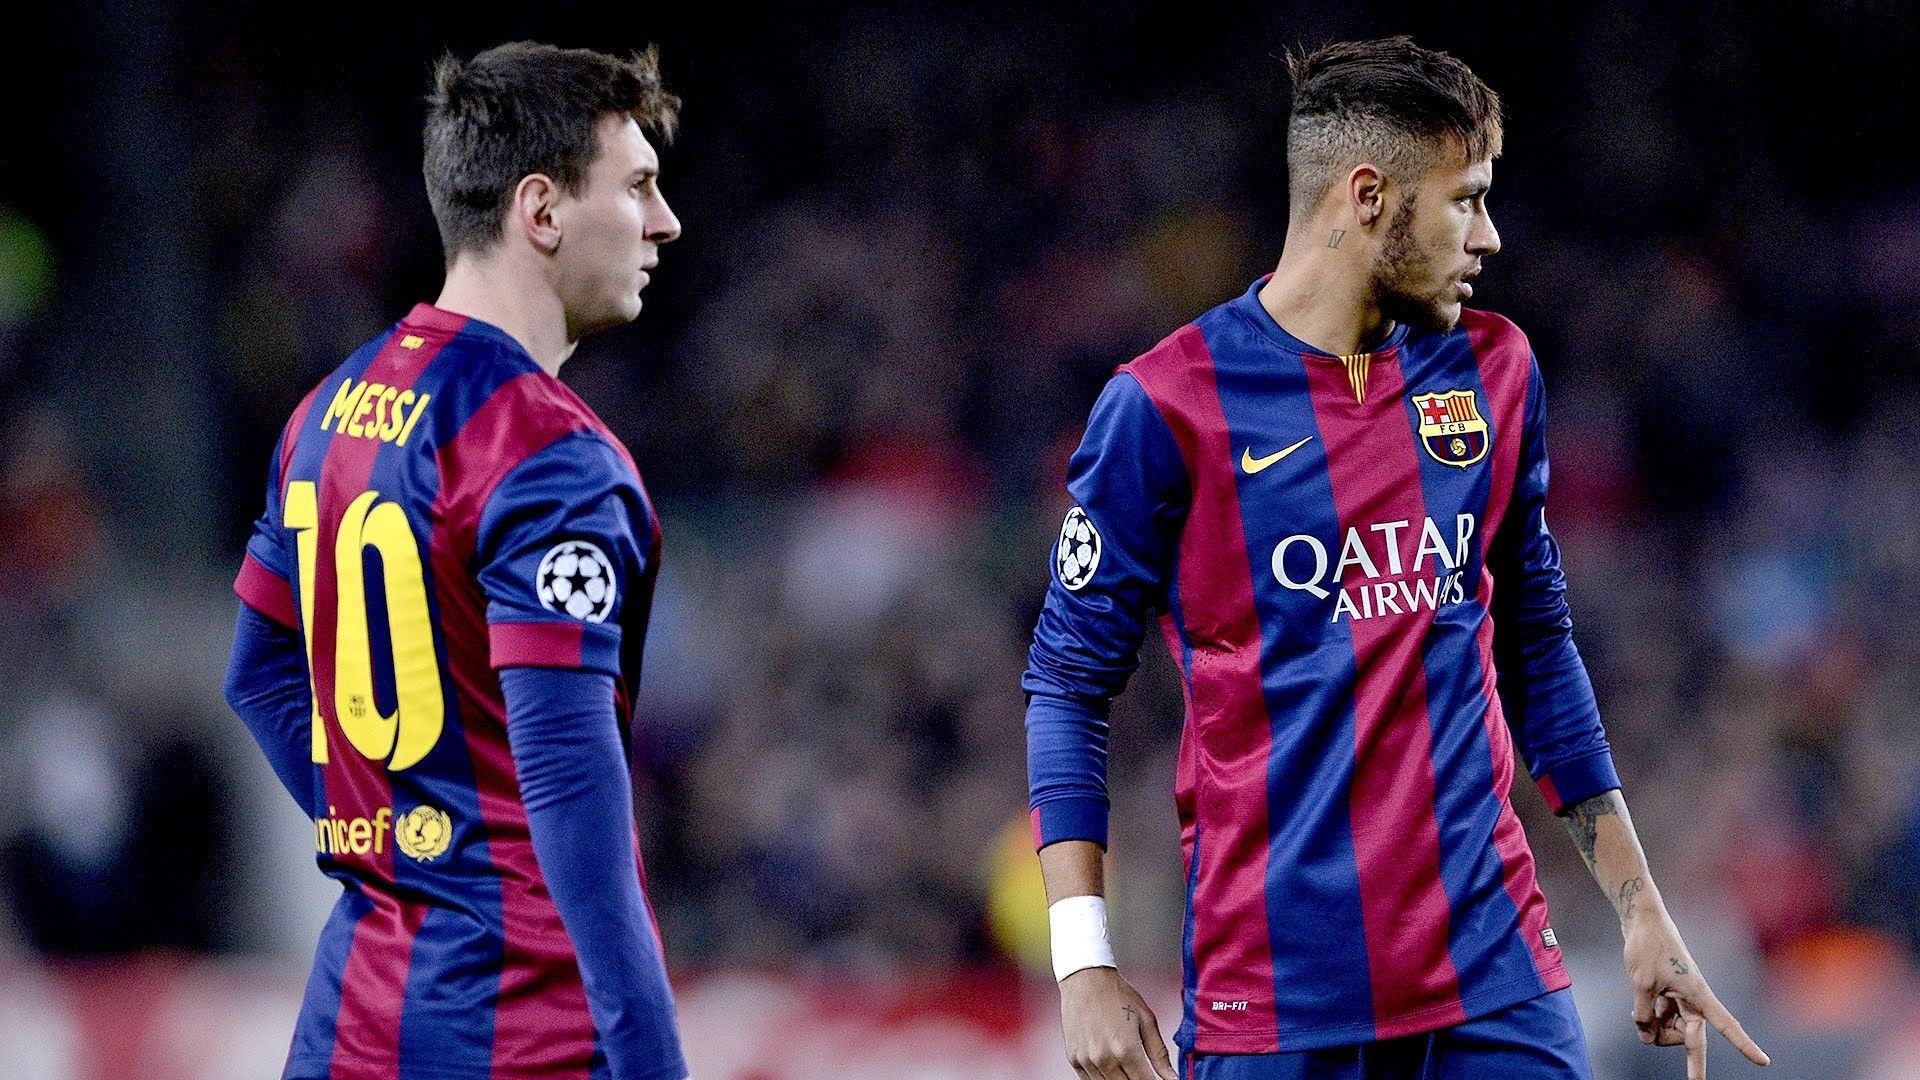 Neymar New Wallpapers HD With Lionel Messi HD 4k High Definition